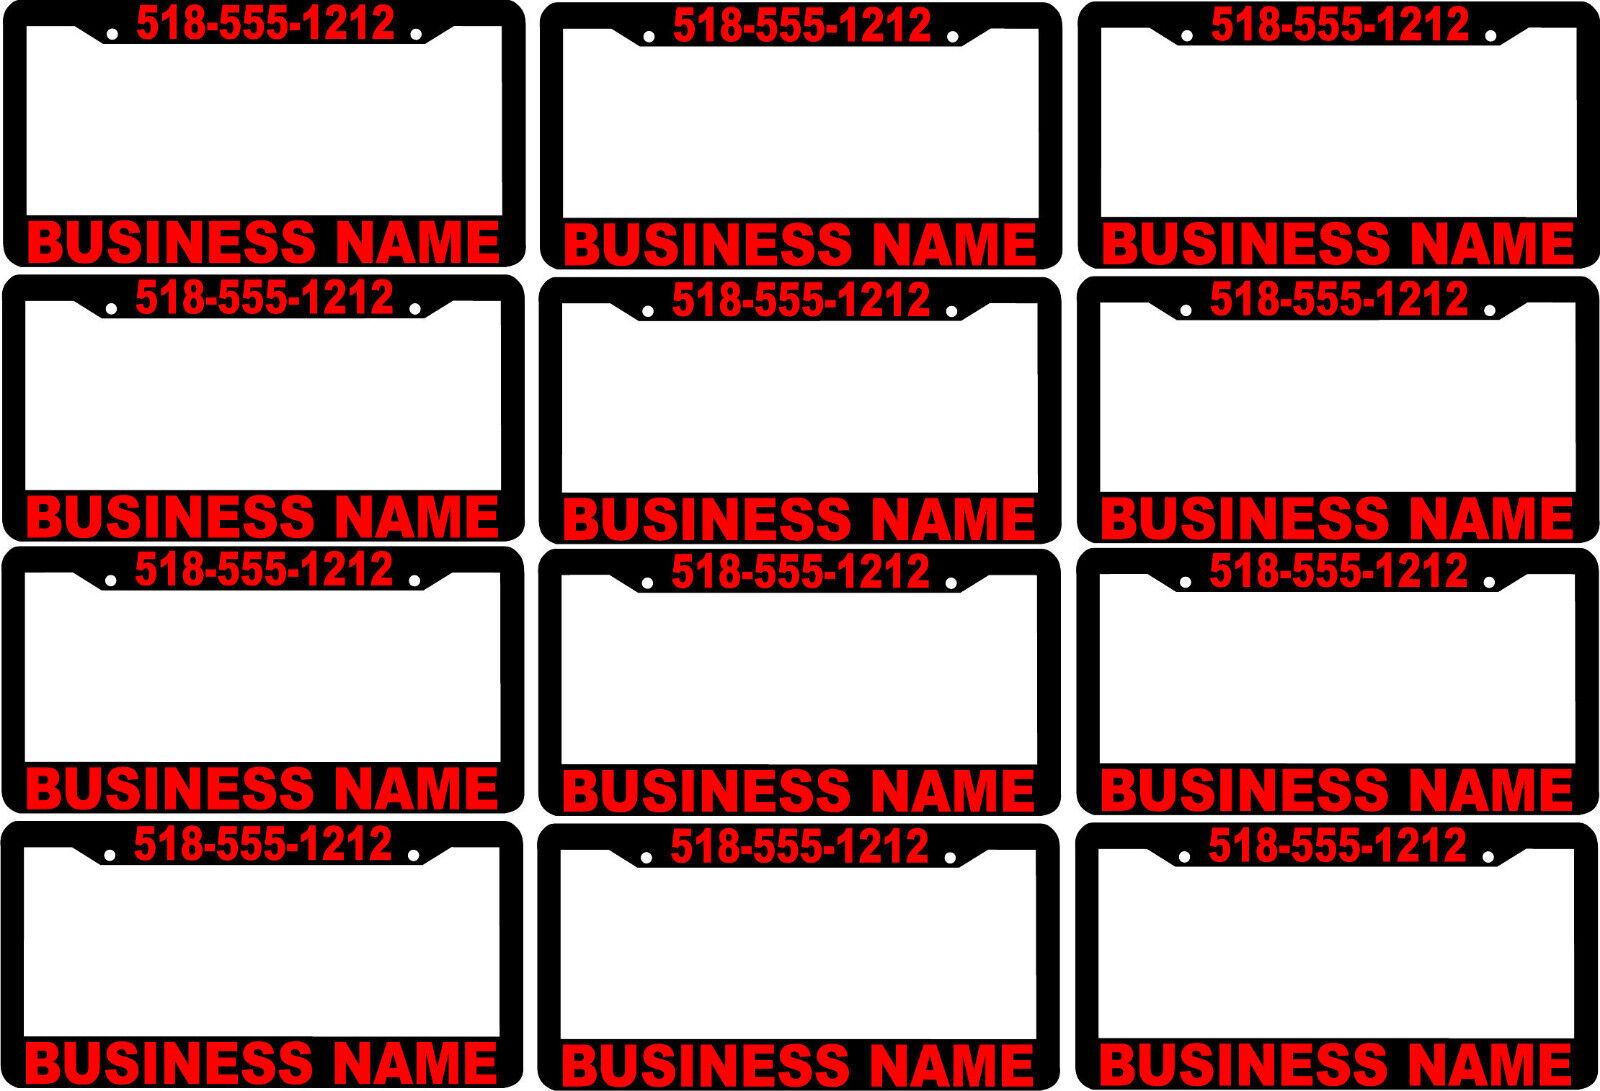 LOT OF 12 RED CUSTOM BUSINESS NAME PHONE NUMBER advertise License Plate Frames